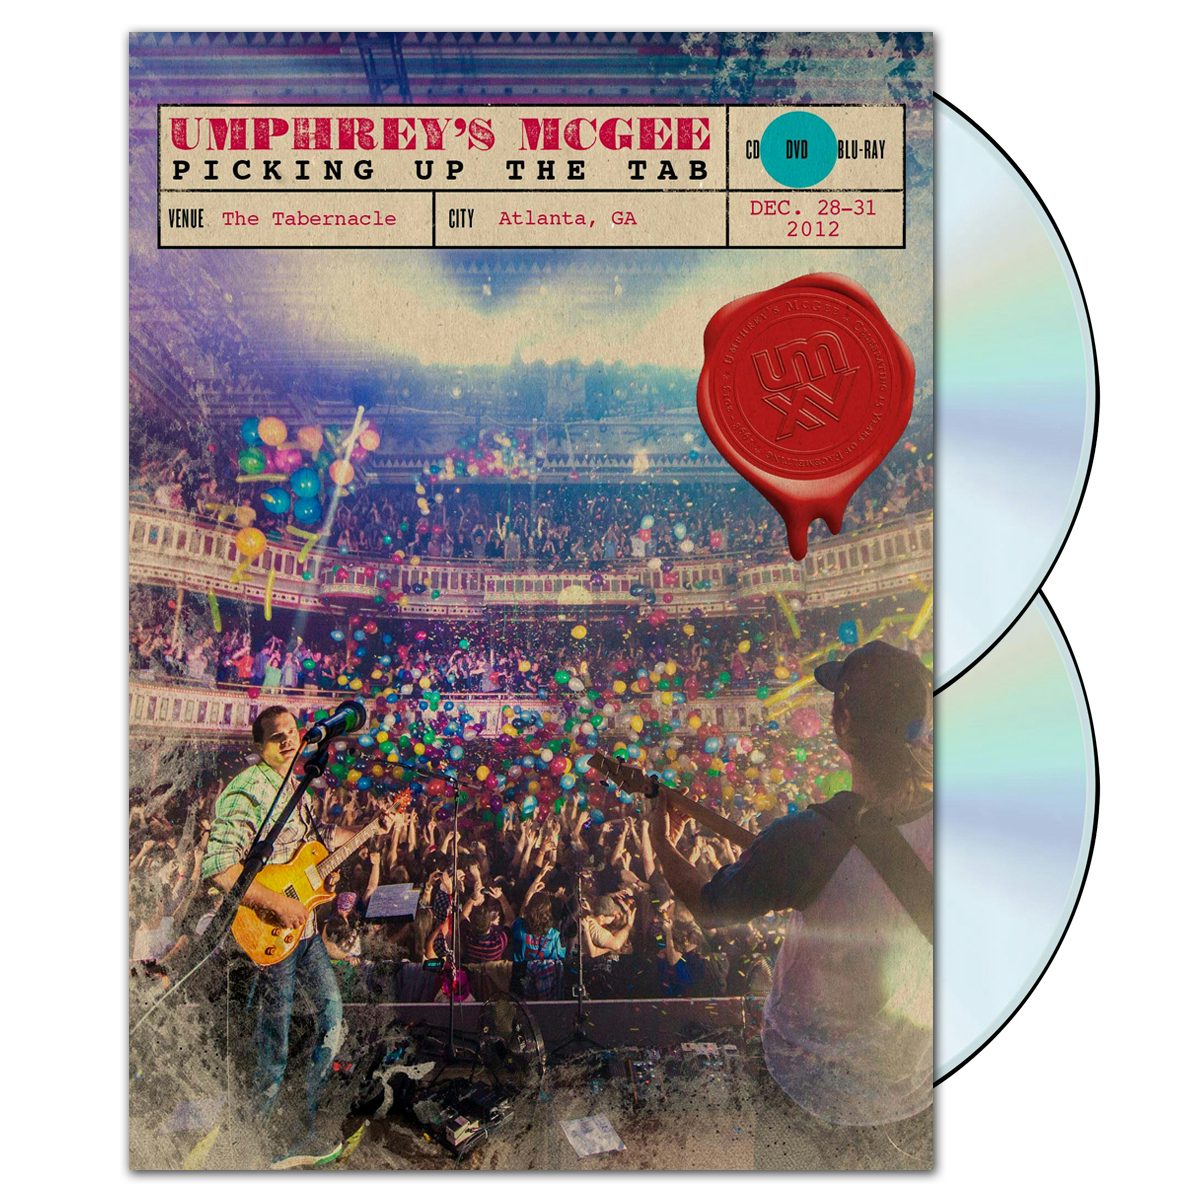 Umphrey's McGee Picking Up the Tab - Best of DVD/Blu-Ray